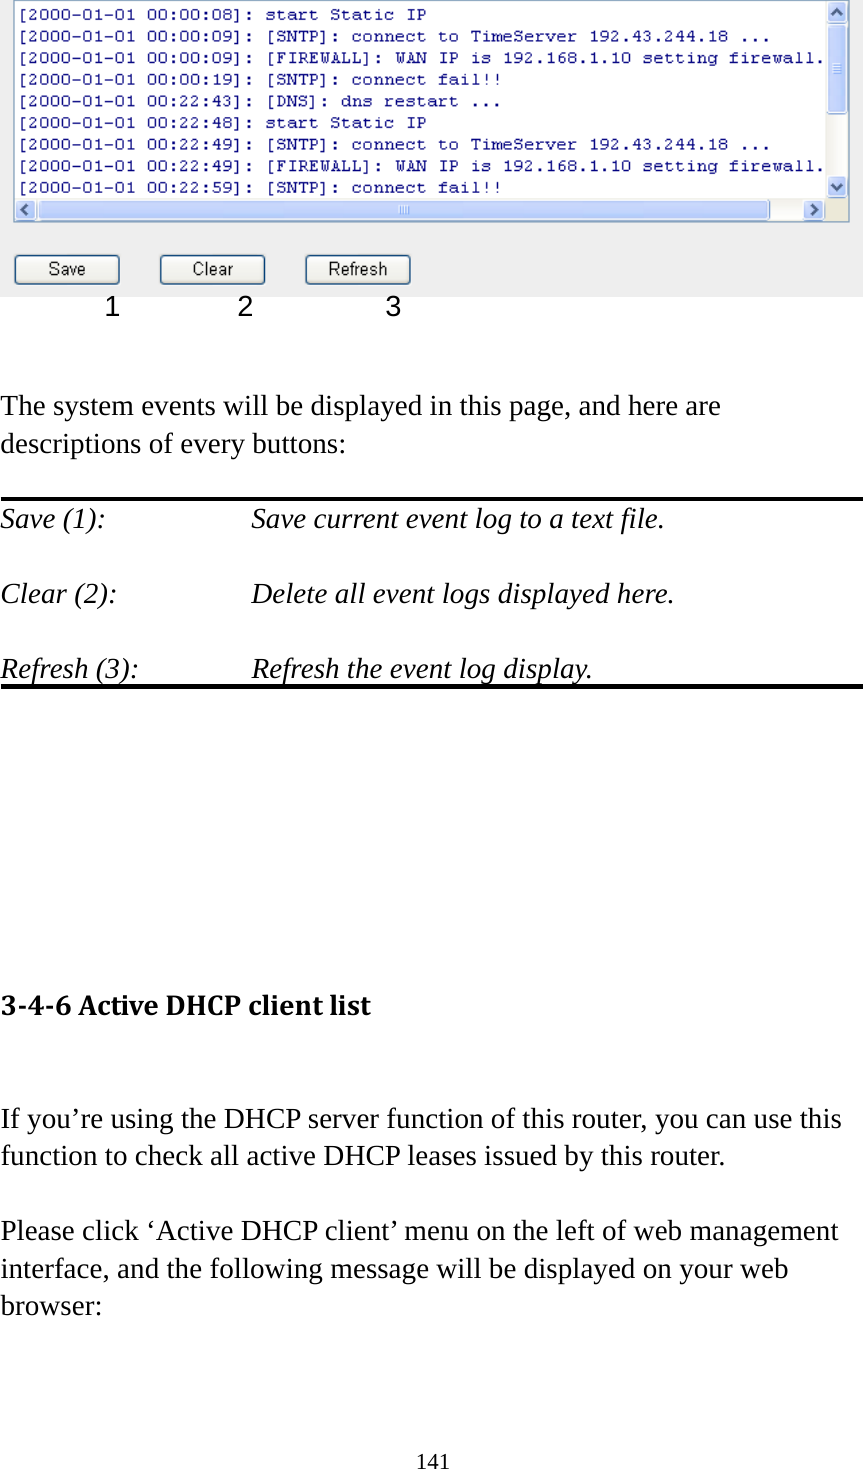 141    The system events will be displayed in this page, and here are descriptions of every buttons:  Save (1):        Save current event log to a text file.  Clear (2):        Delete all event logs displayed here.  Refresh (3):      Refresh the event log display.        346ActiveDHCPclientlist If you’re using the DHCP server function of this router, you can use this function to check all active DHCP leases issued by this router.  Please click ‘Active DHCP client’ menu on the left of web management interface, and the following message will be displayed on your web browser:  1 2  3